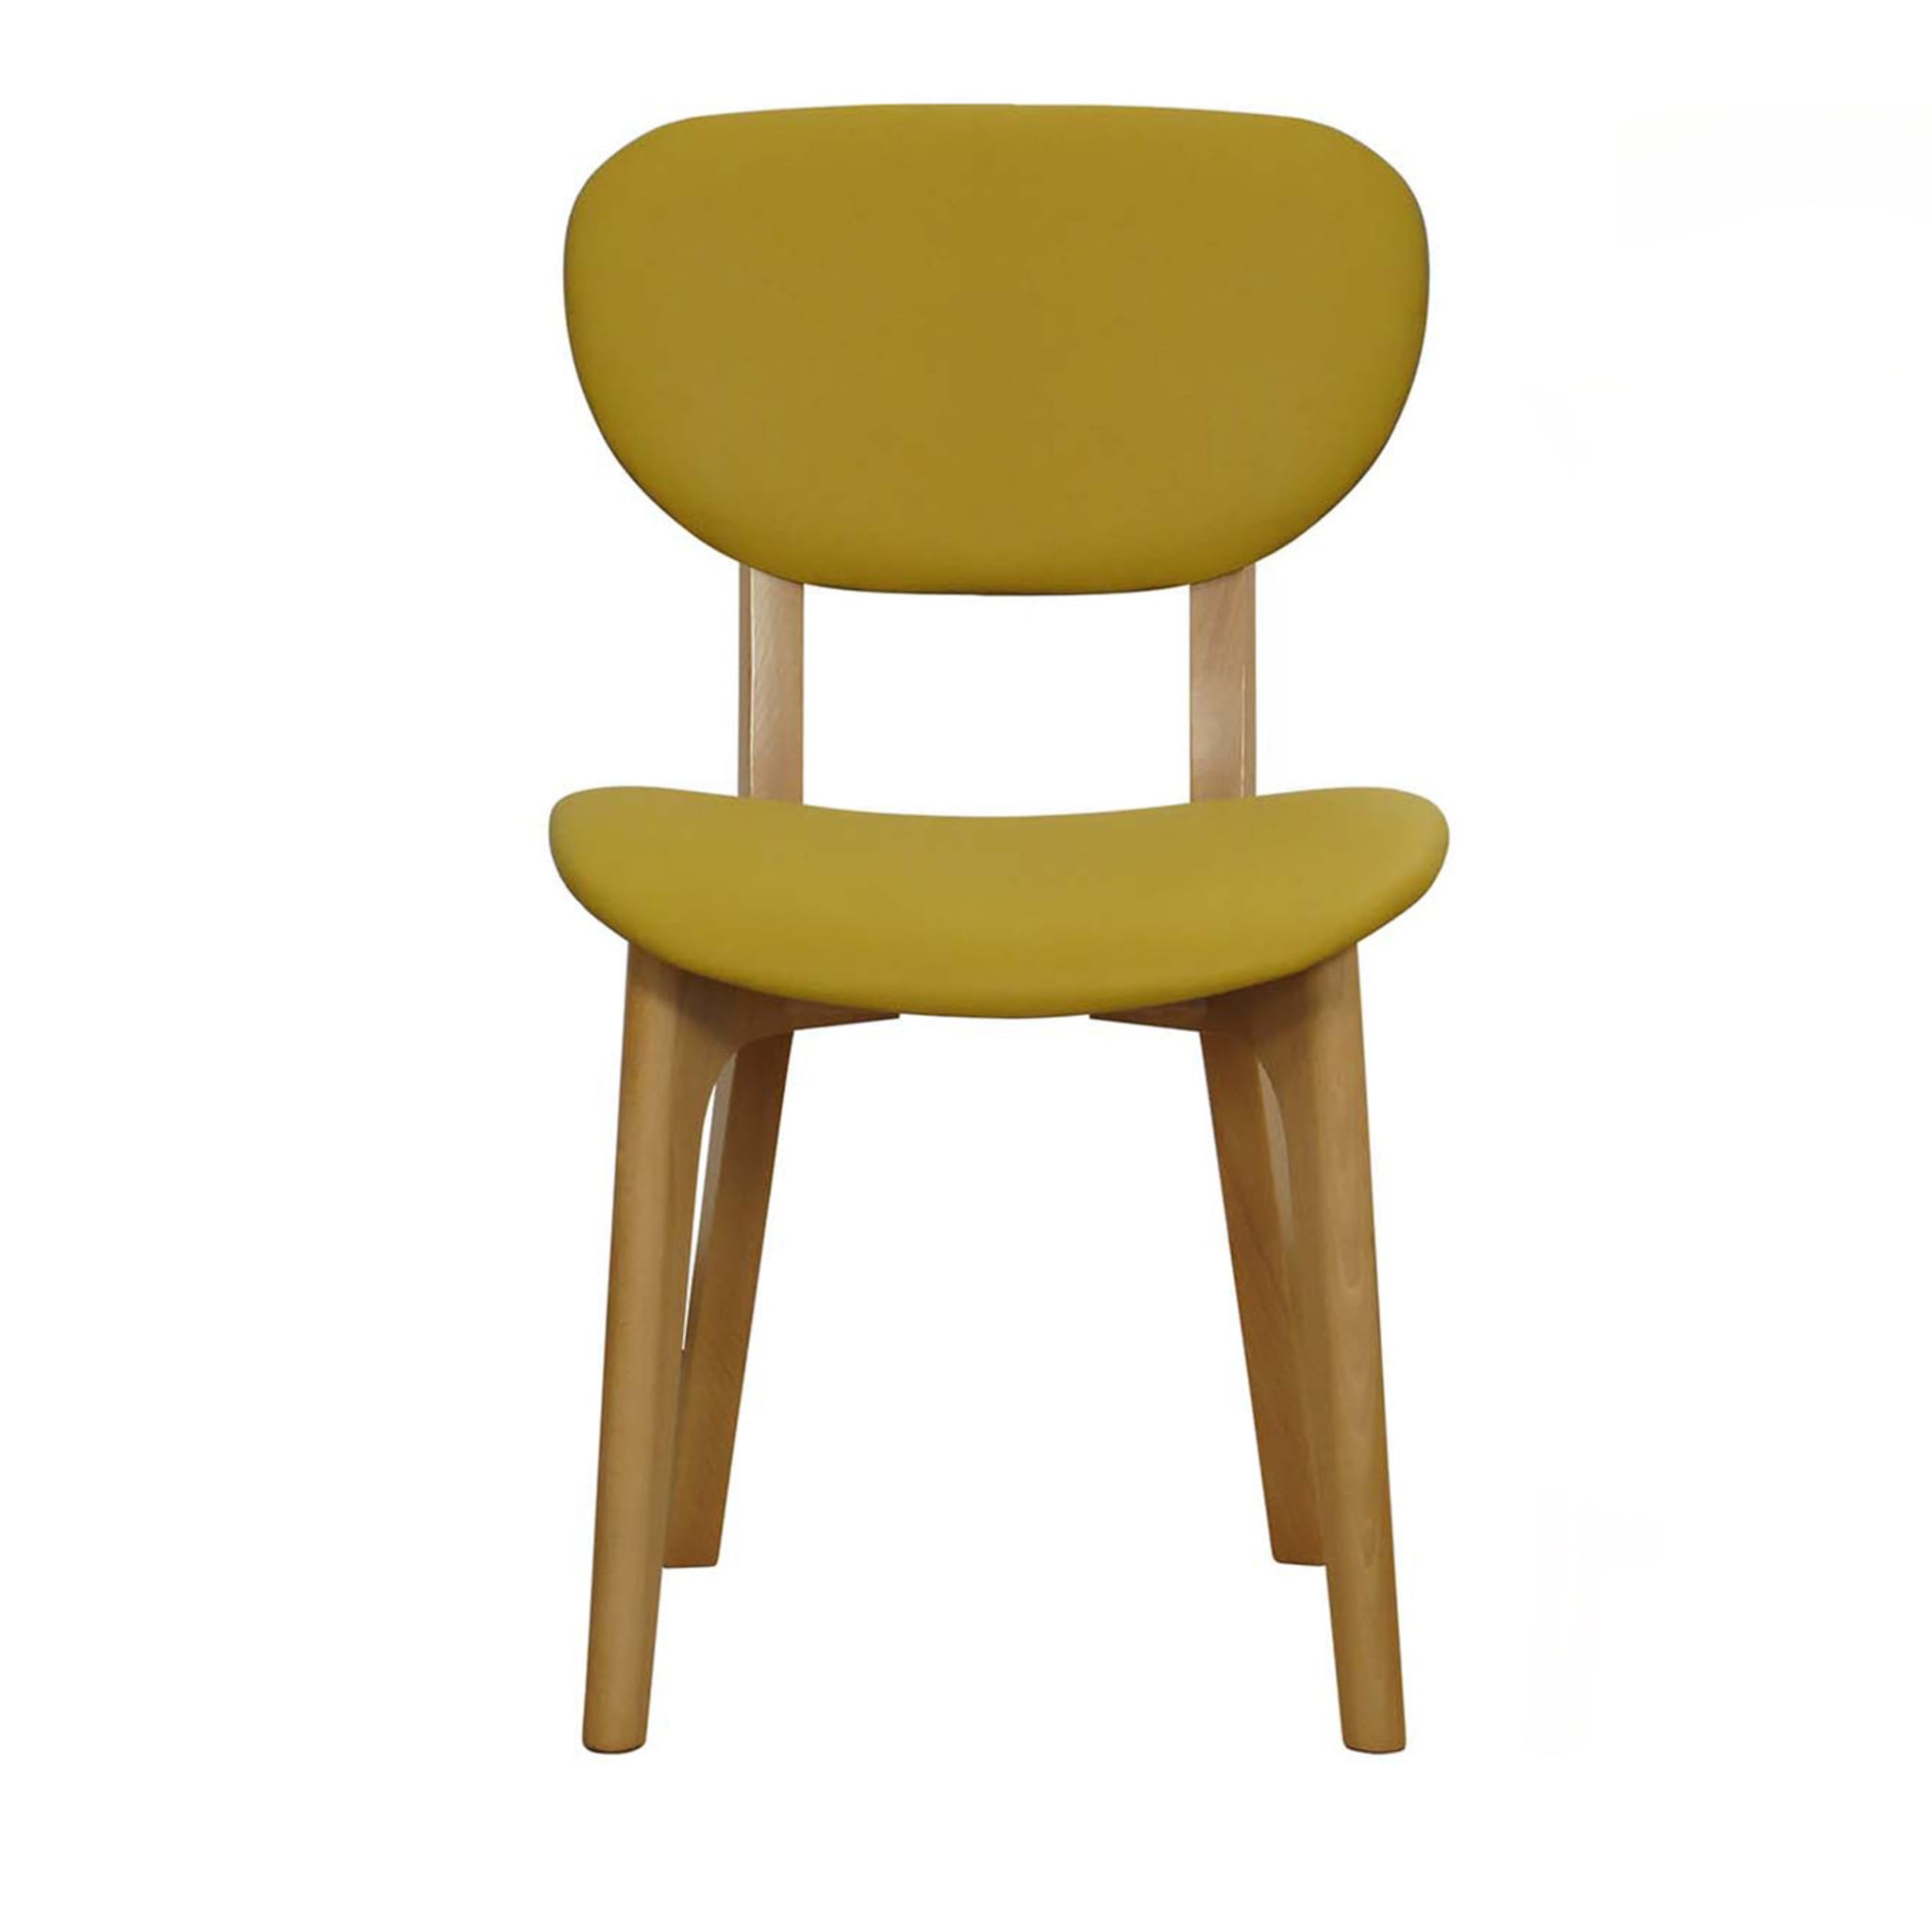 Cozy Set of 2 Mustard Chairs by Giacomo Cattani - Main view